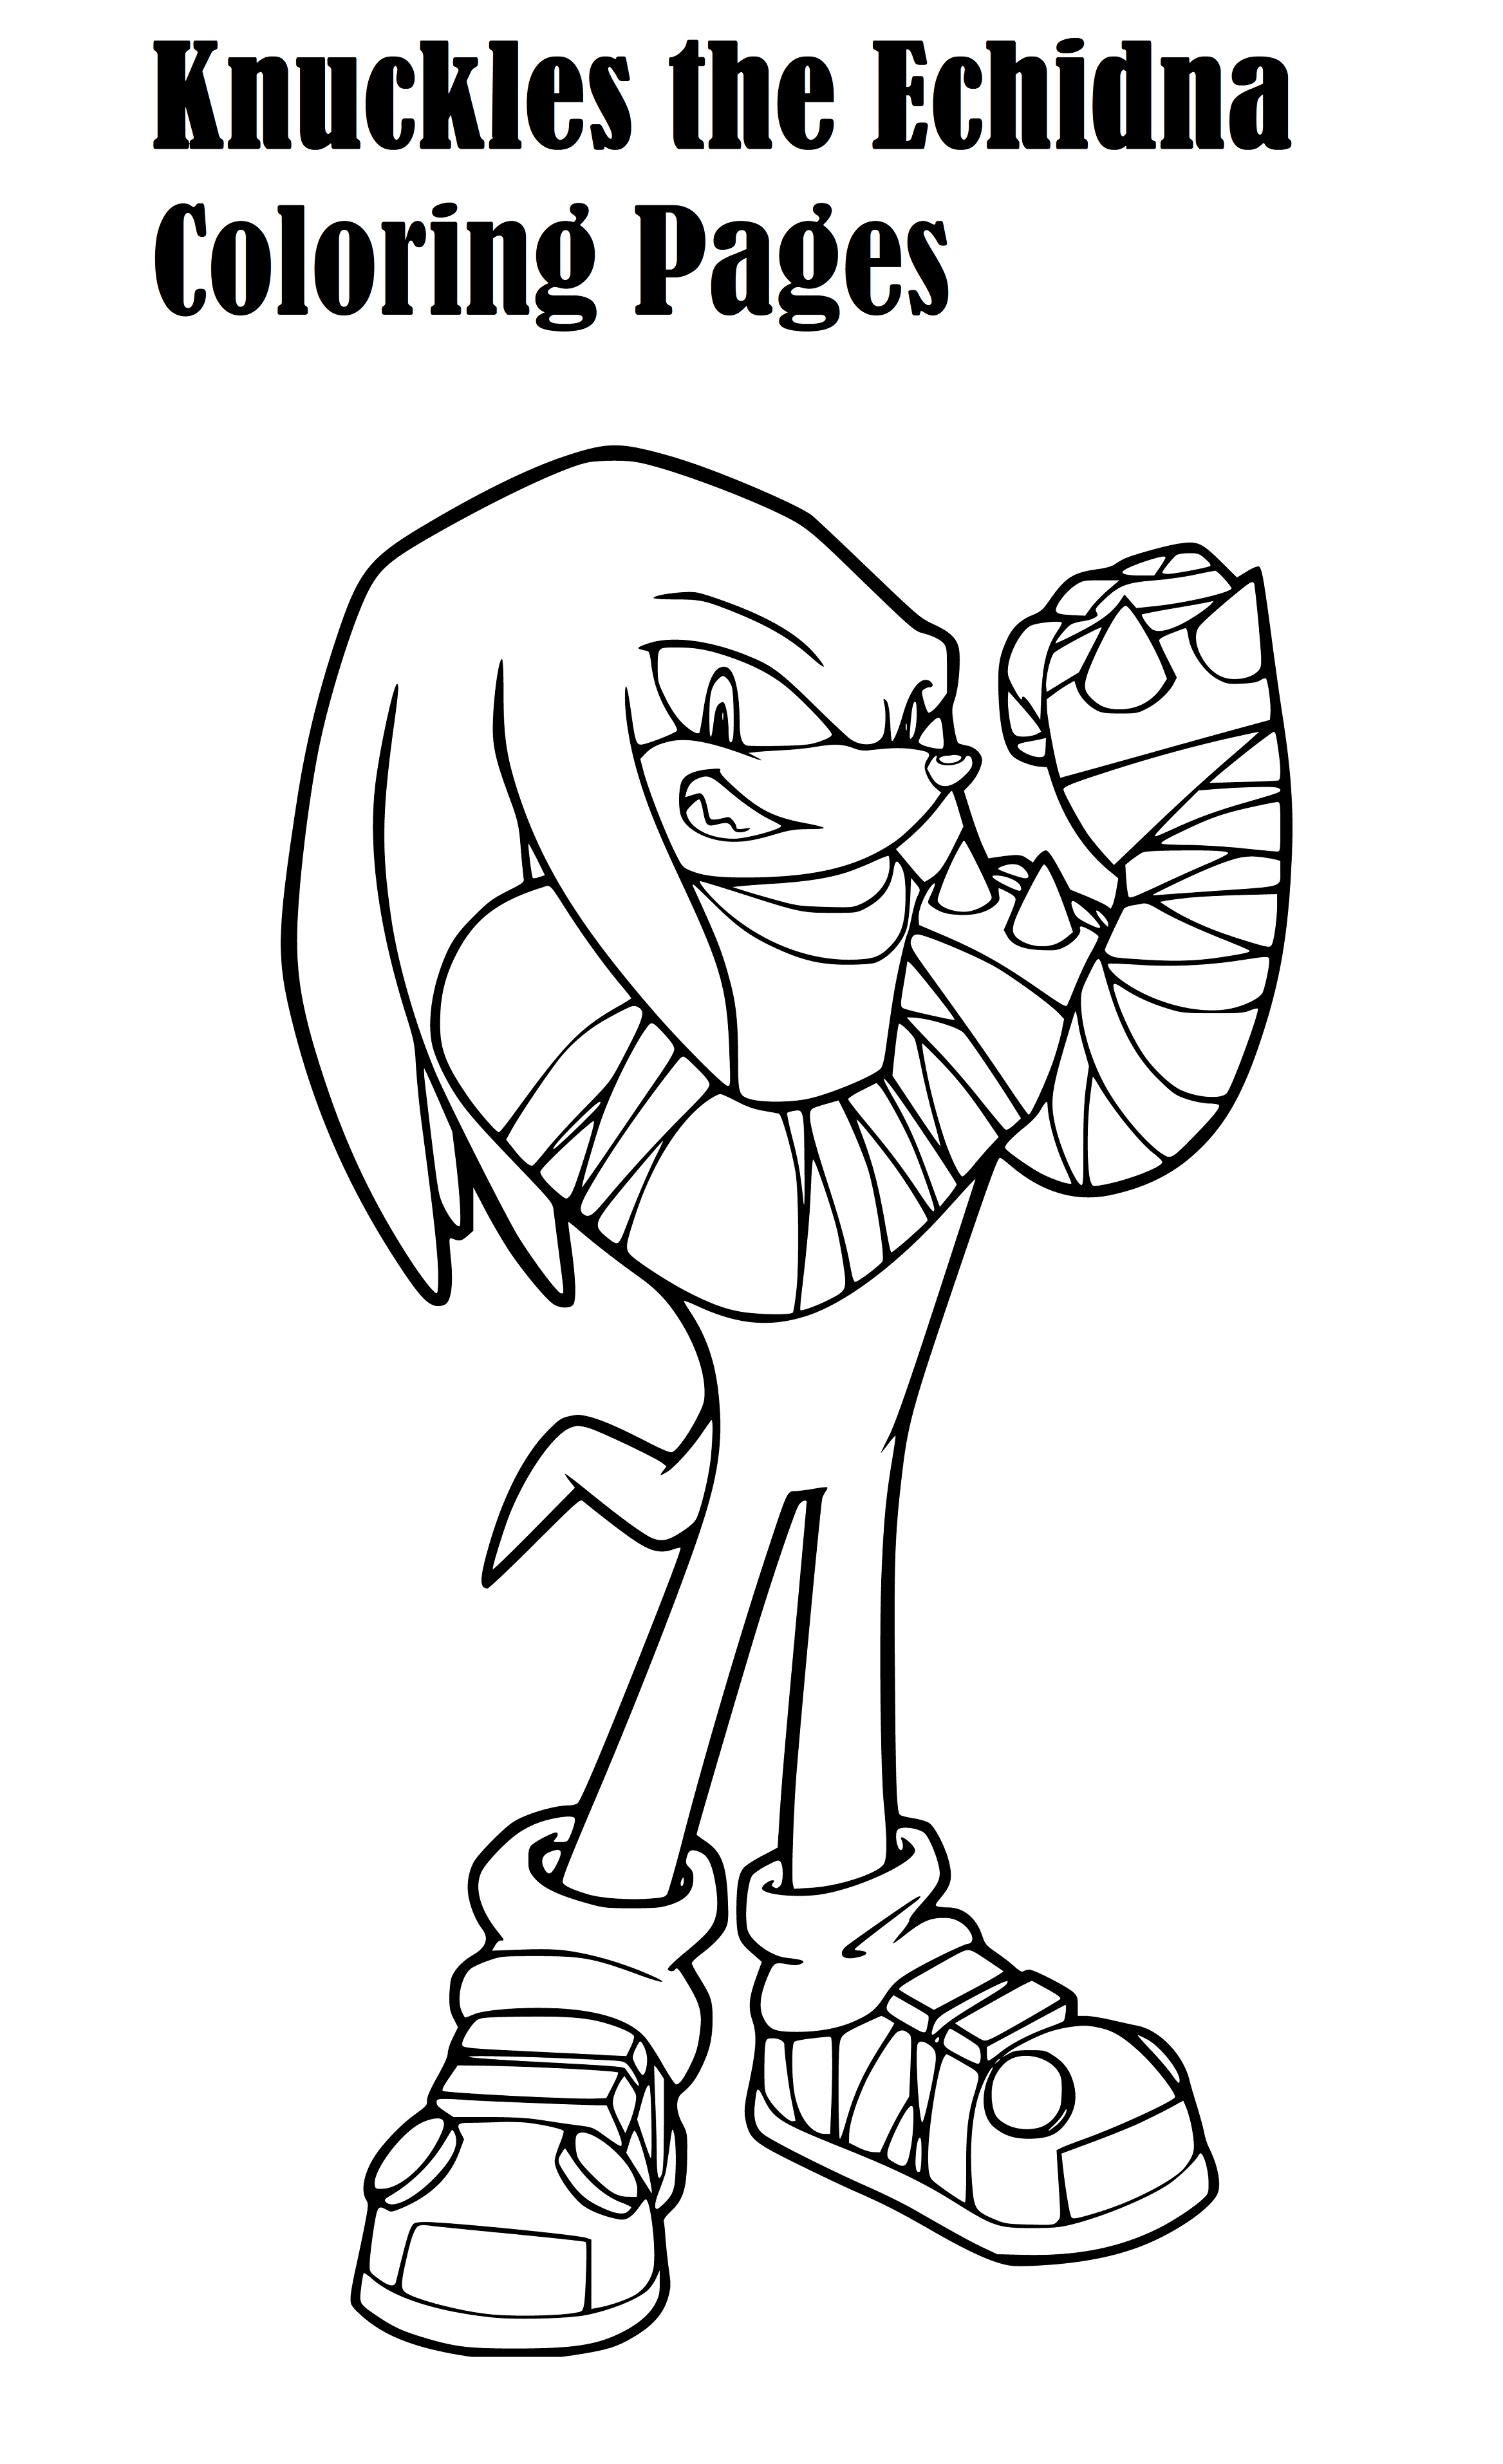 Printable Sonic Knuckles Coloring Page for kids.